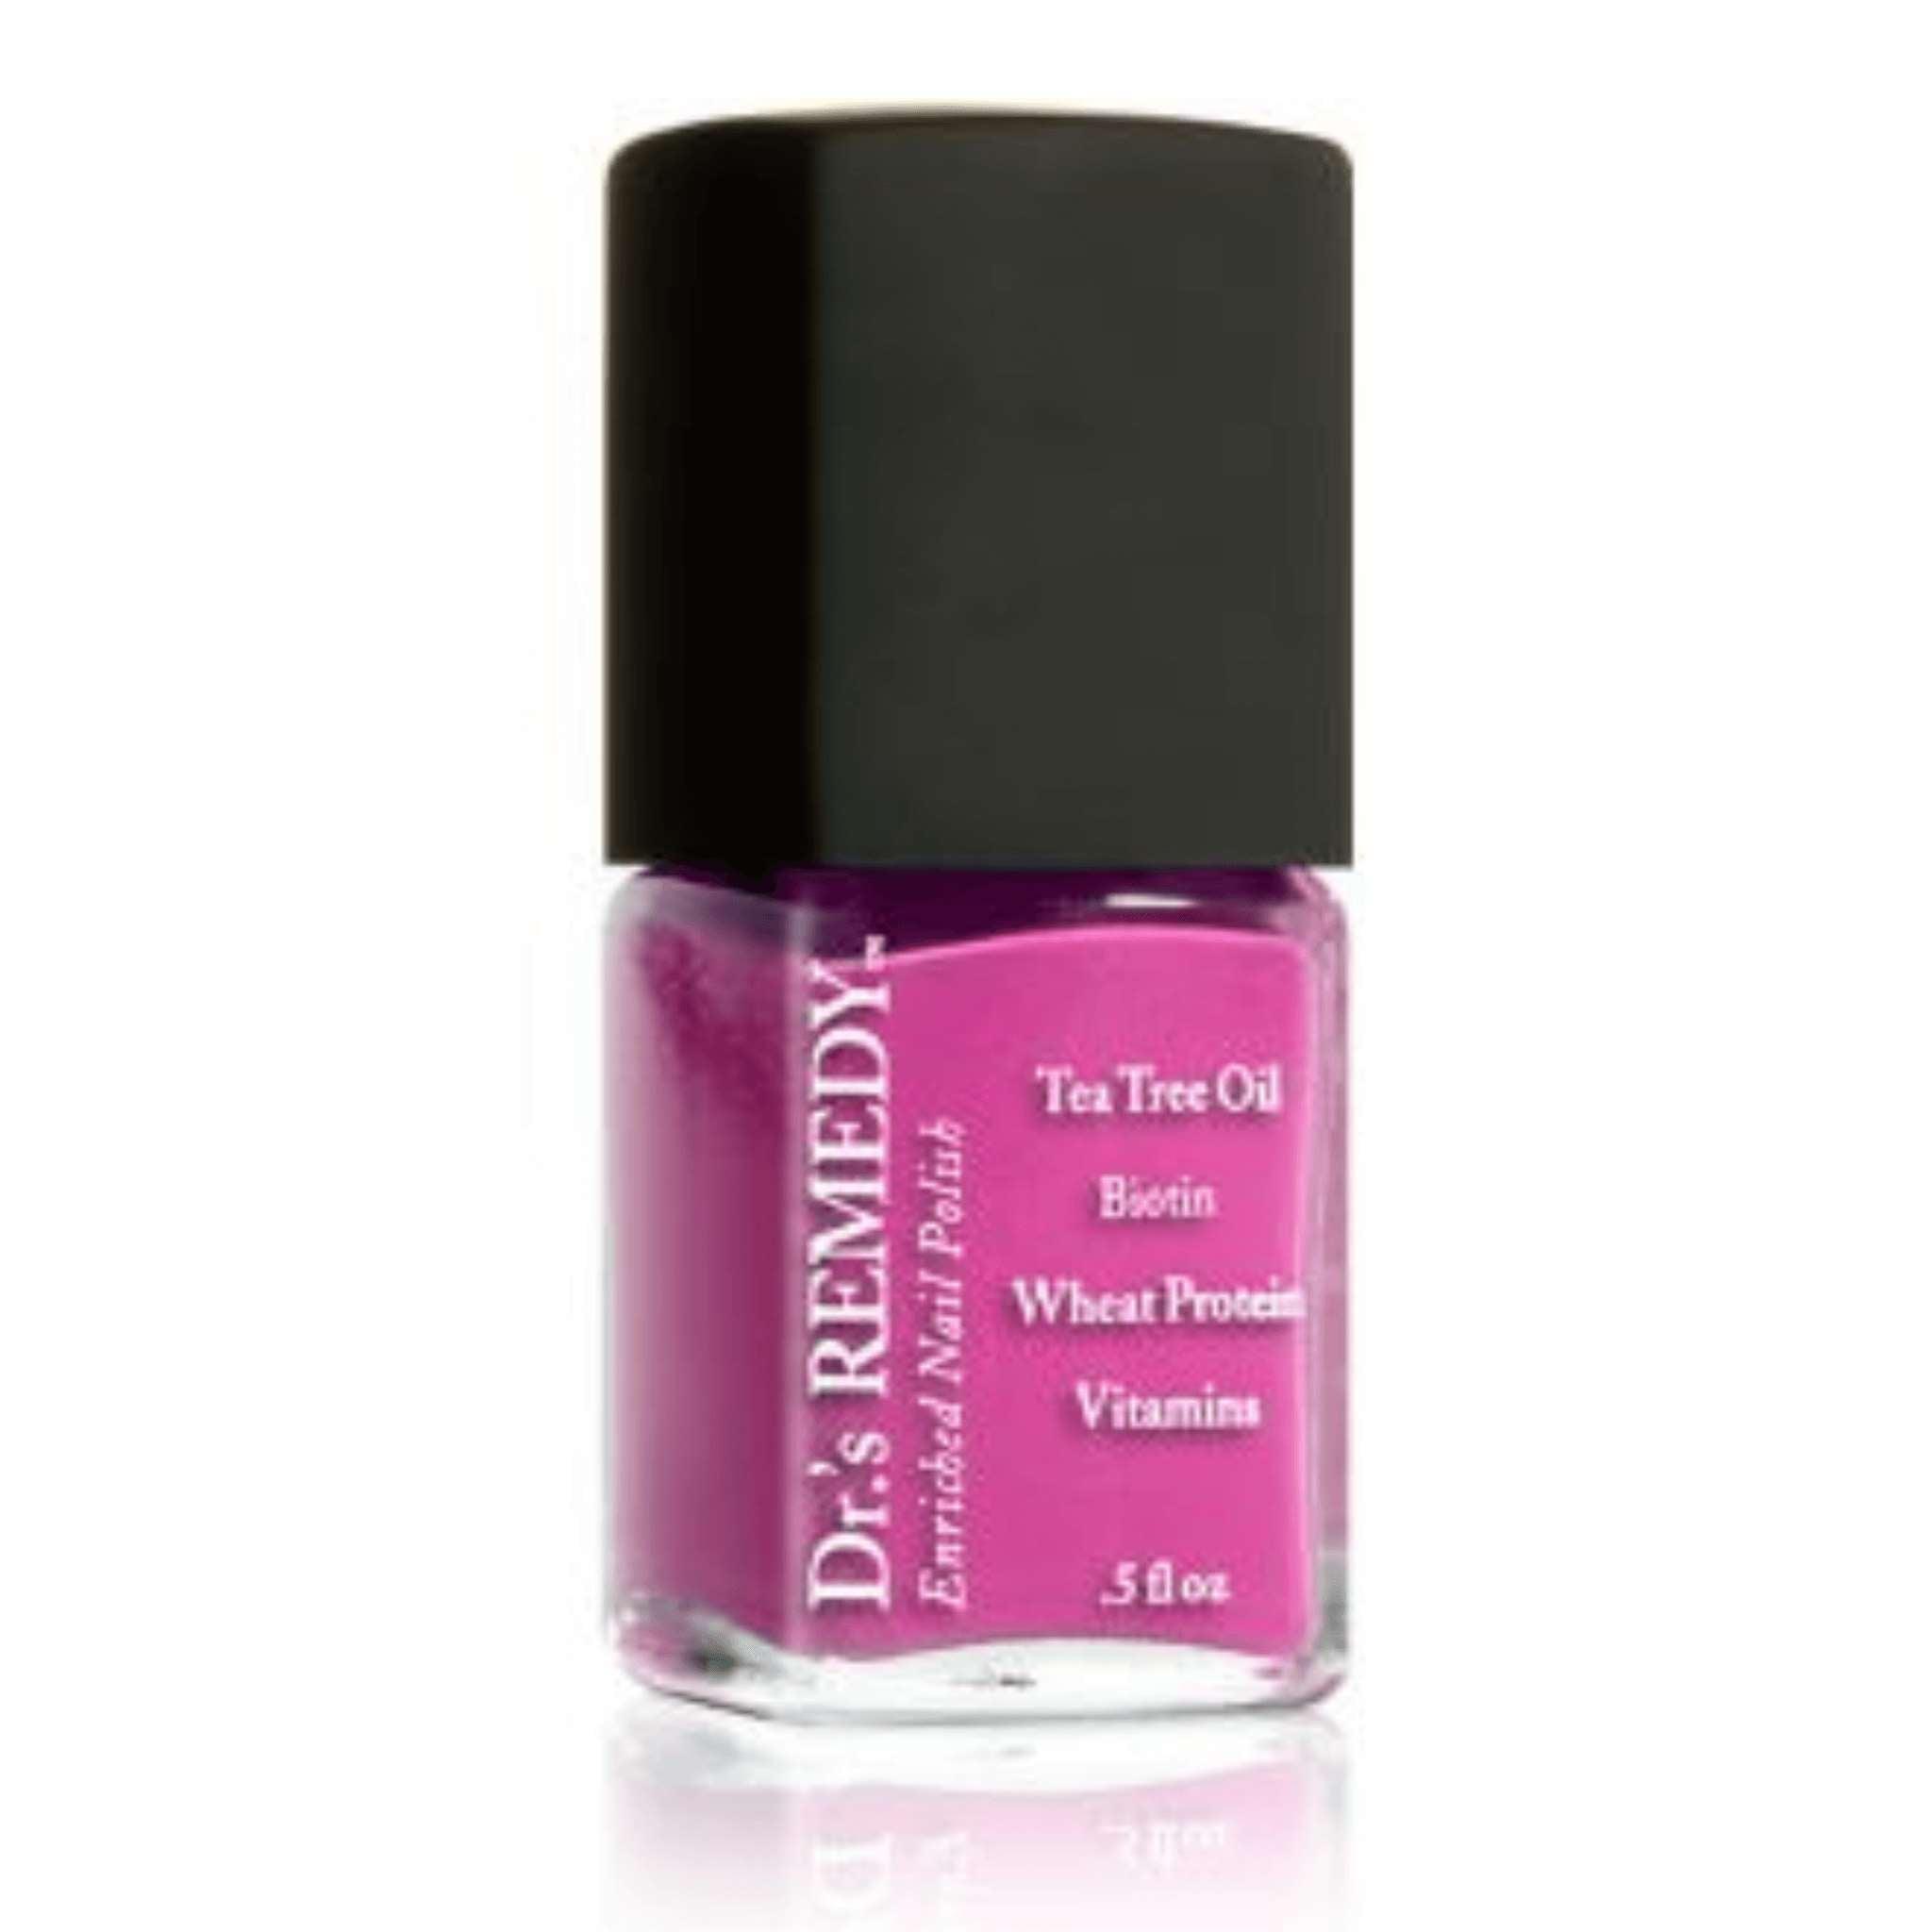 Dr.'s REMEDY Enriched Nail Polish / MAGNIFICENT Magenta (creme) 15ml